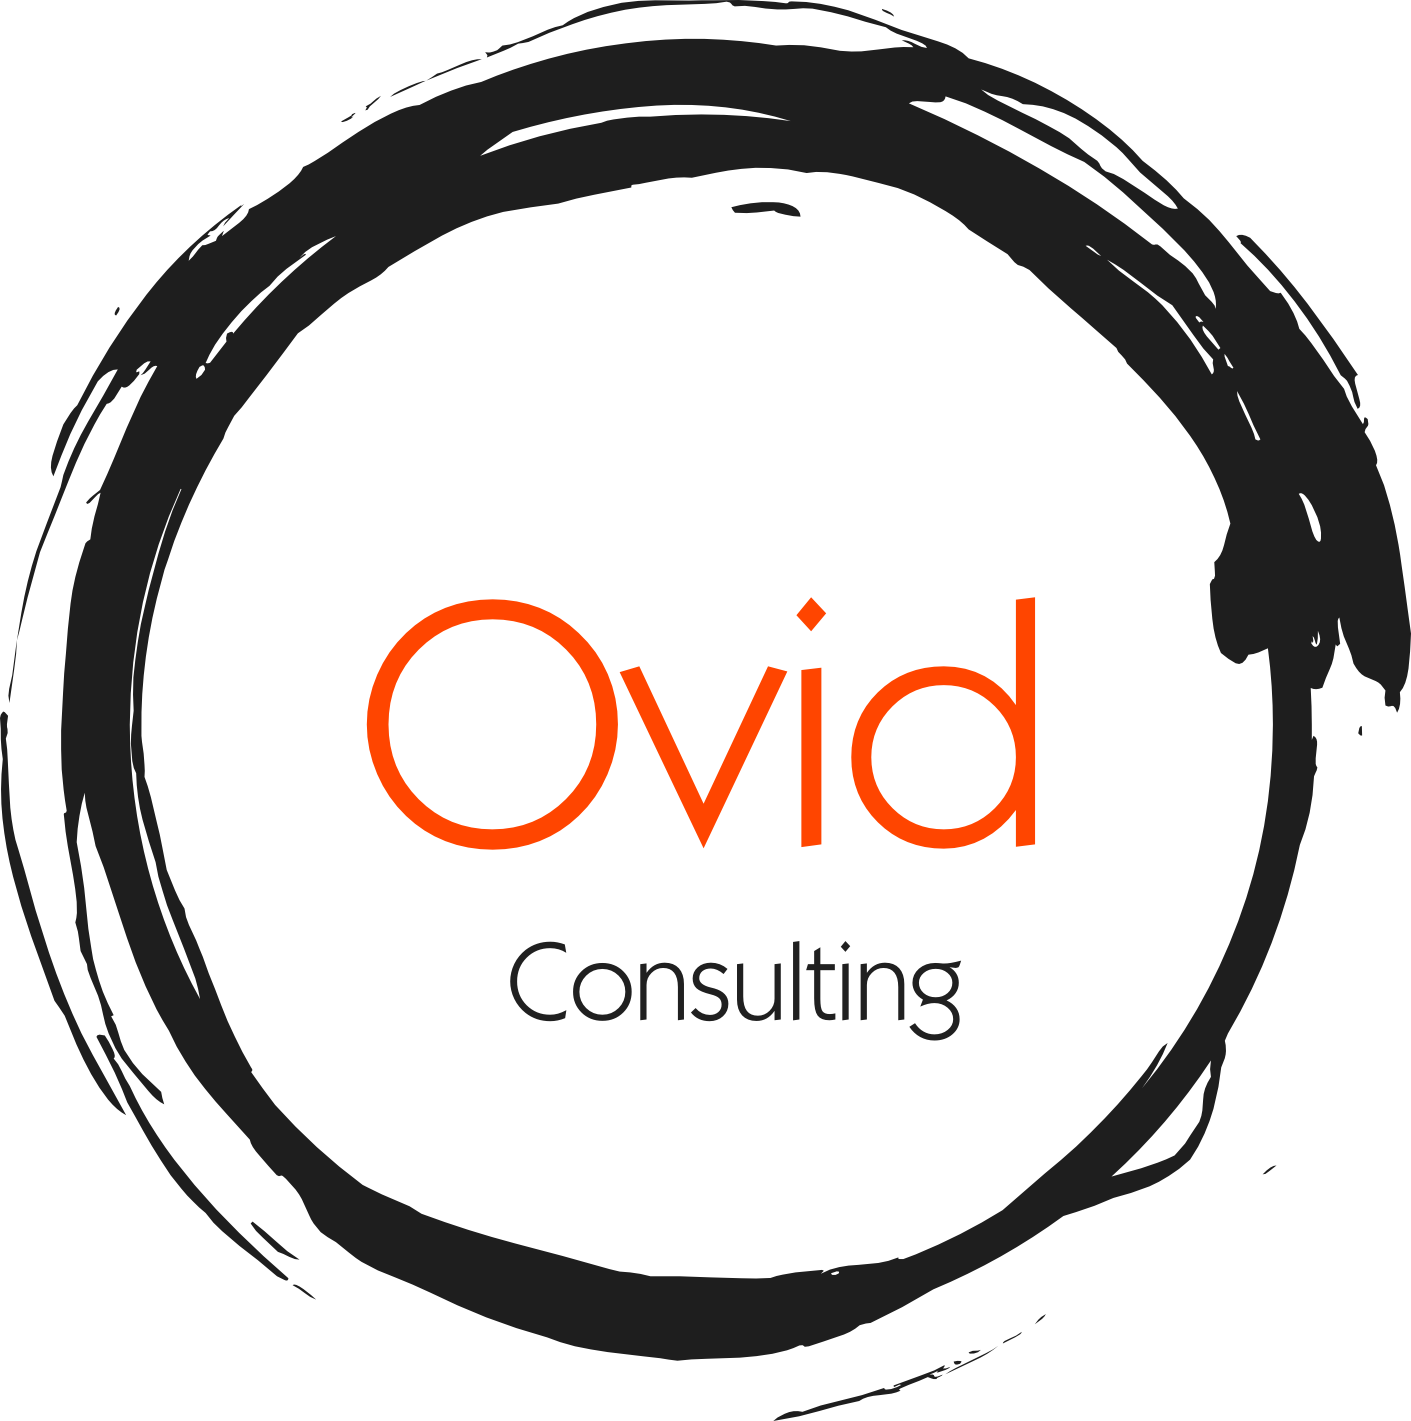 Ovid Consulting